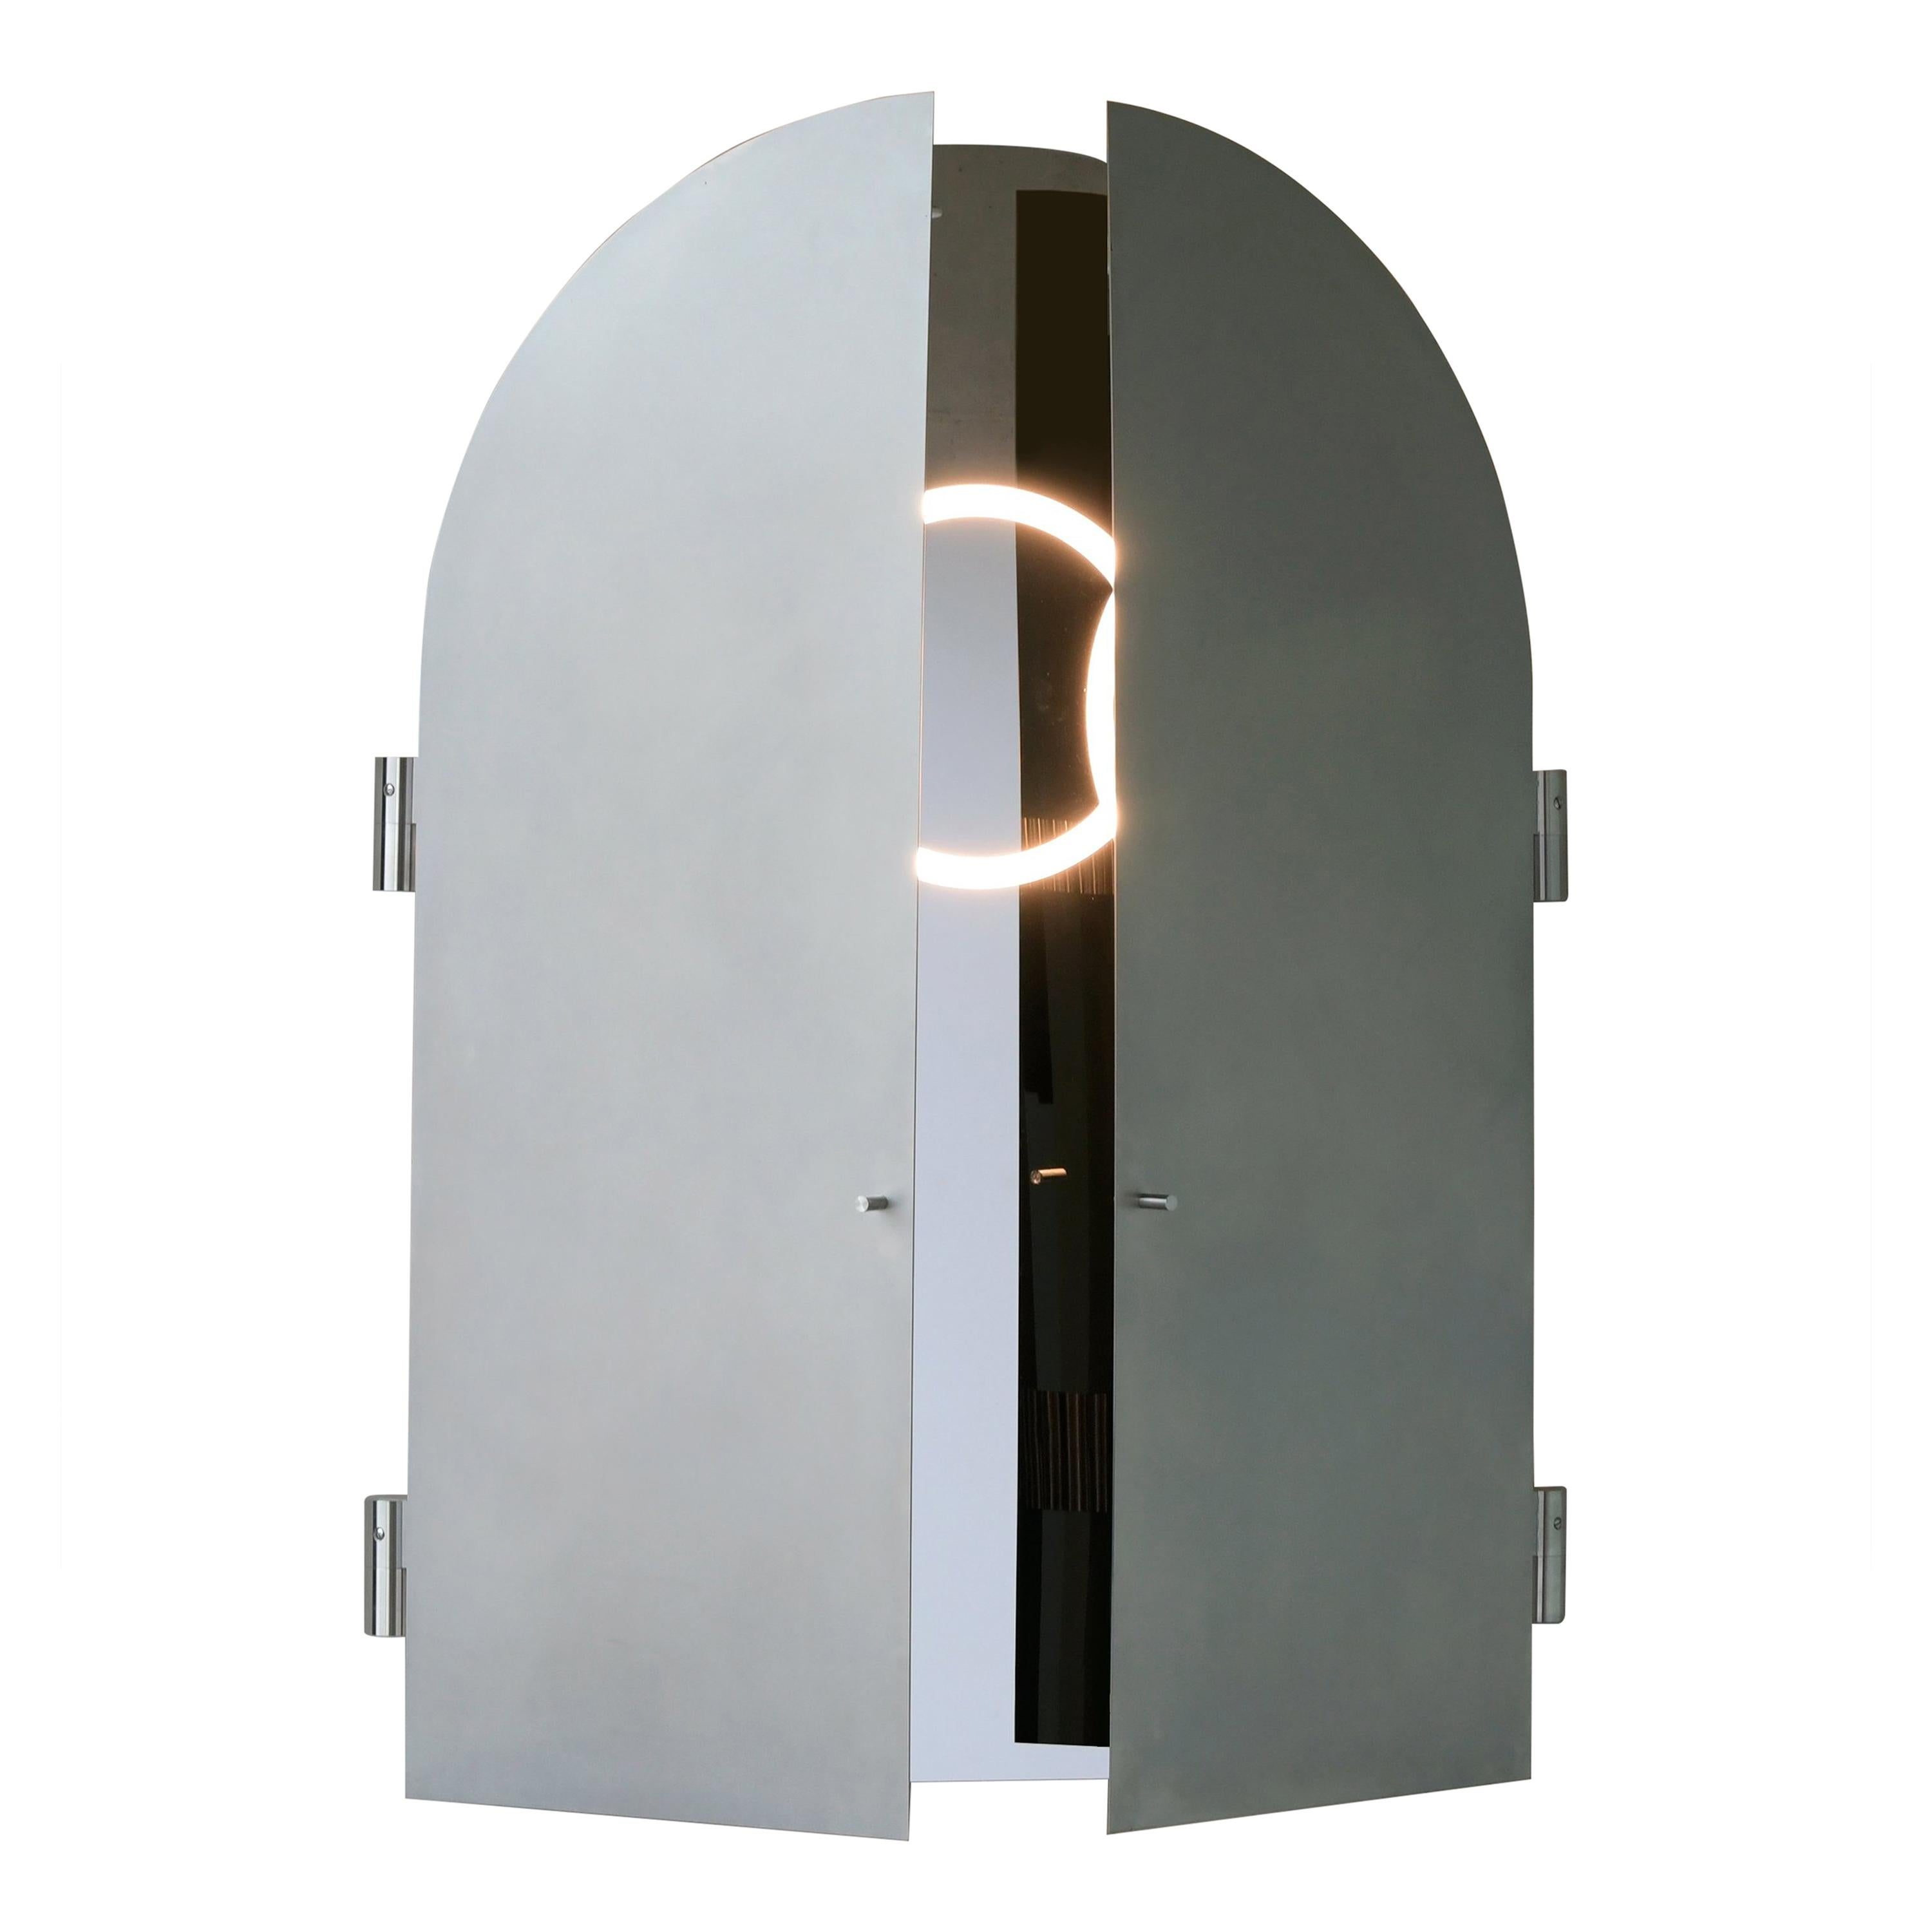 Monumental triptychs mirror by Jesse Visser
Dimensions: 165 x 230 x 5 cm
Polished stainless steel, dimmable led light

Jesse Visser presents imposing monumental limited editions: triptychs – of which the largest is 1.65 meters high and 2.30